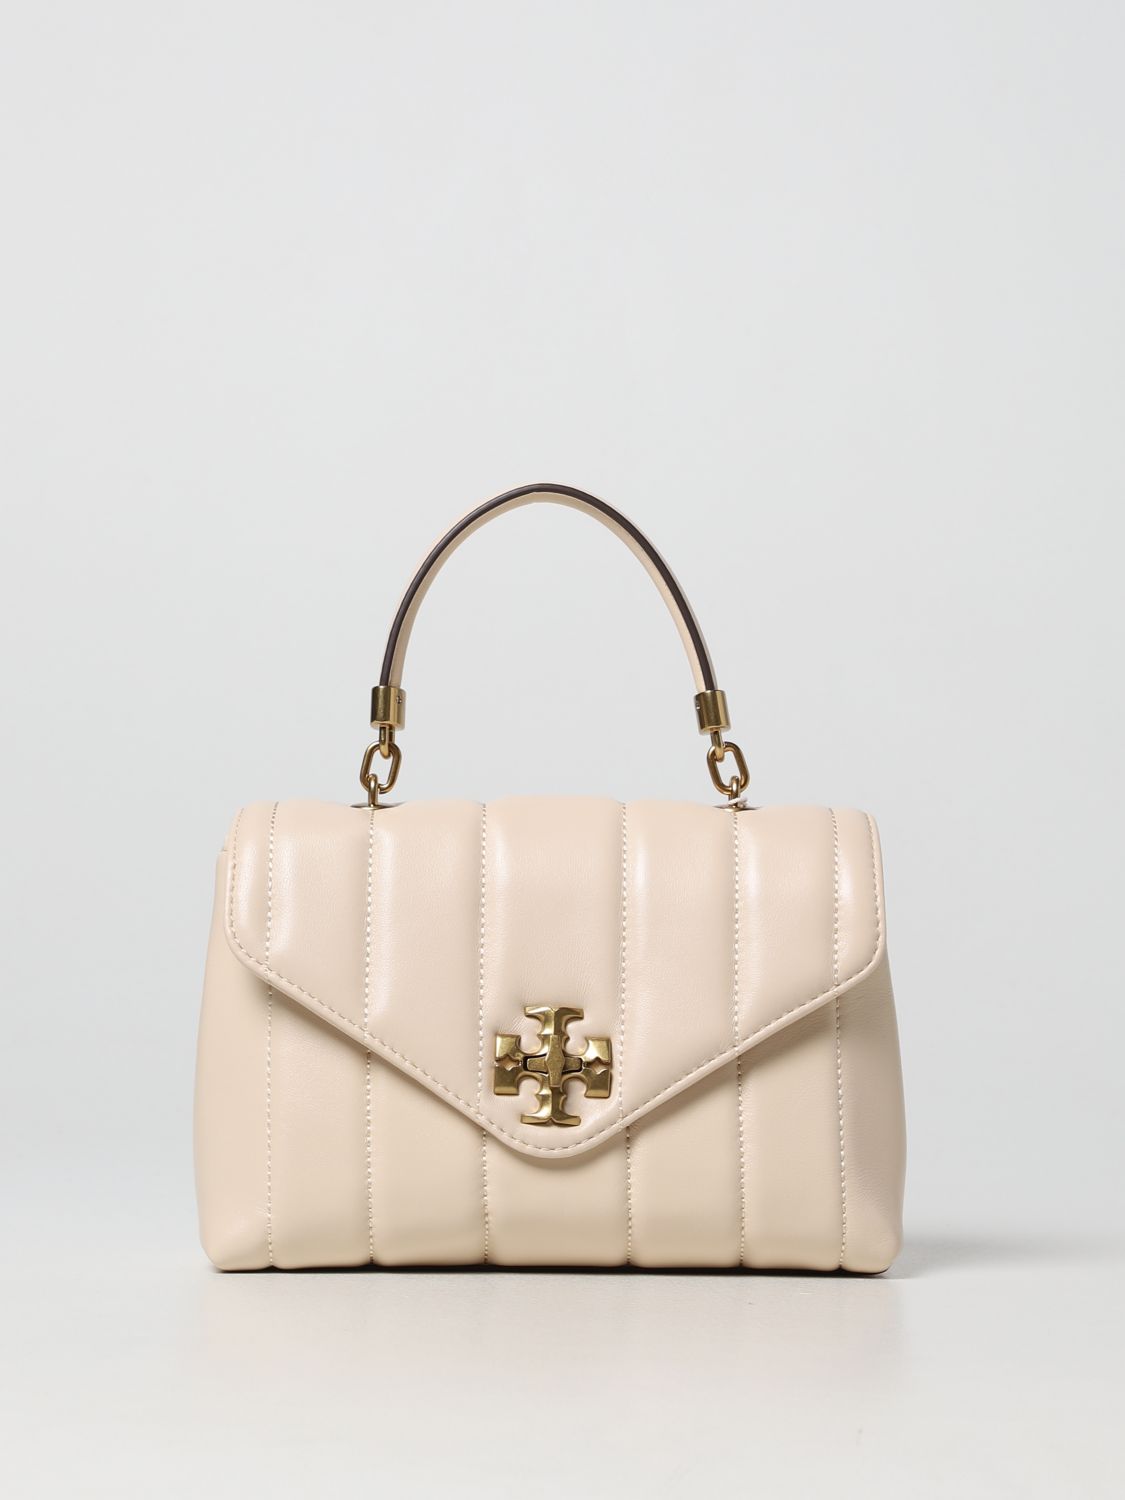 Tory+Burch+Kira+Chevron+Quilted+Ivory+Leather+Tote+B1523 for sale online